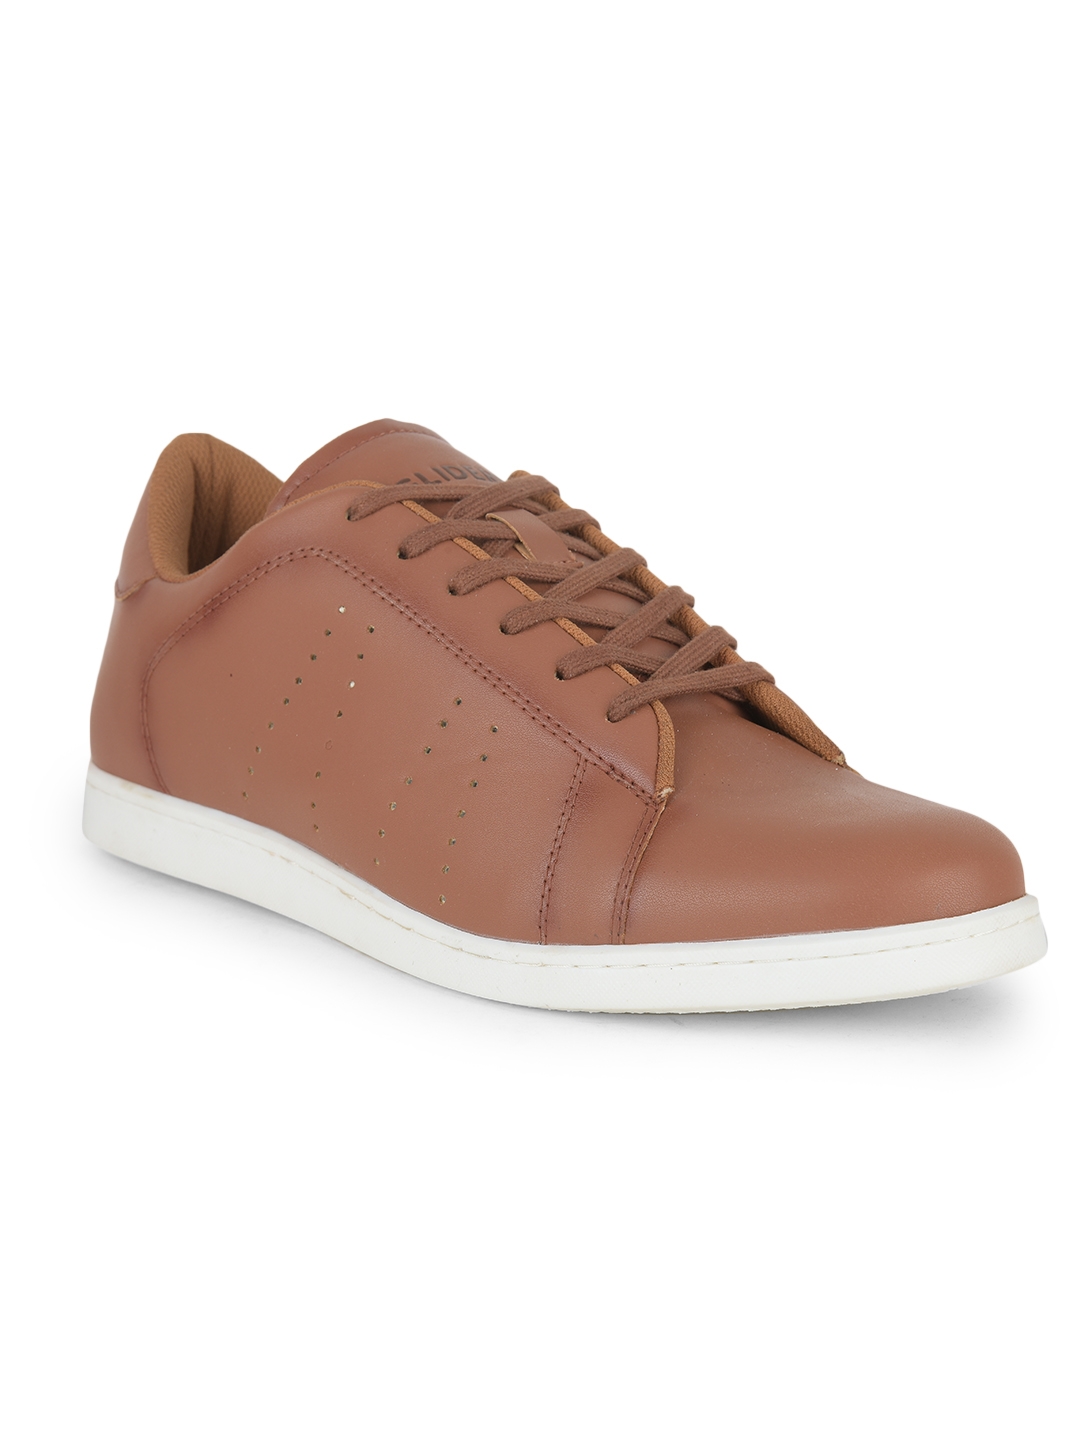 Liberty | Gliders by Liberty Tan Casual Shoes ANDERSON MRP 2999 For :- Women